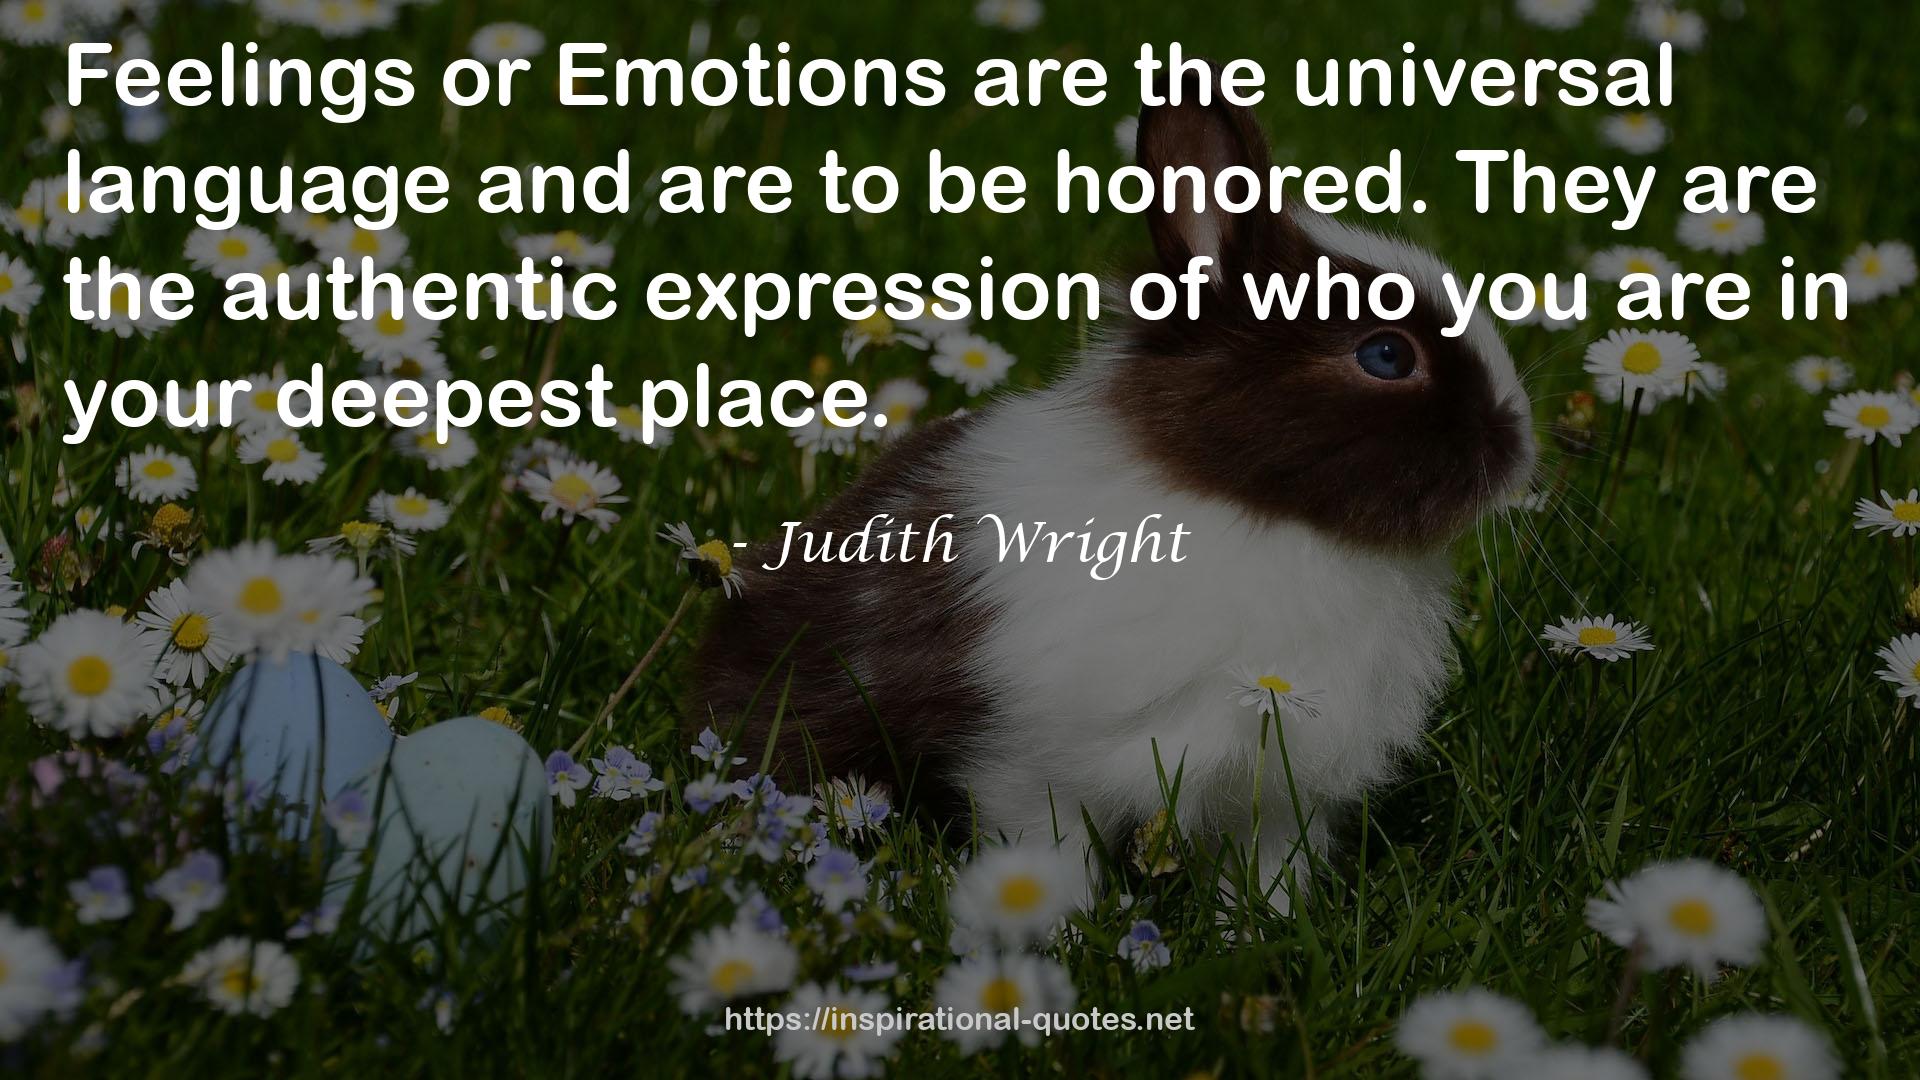 Judith Wright QUOTES